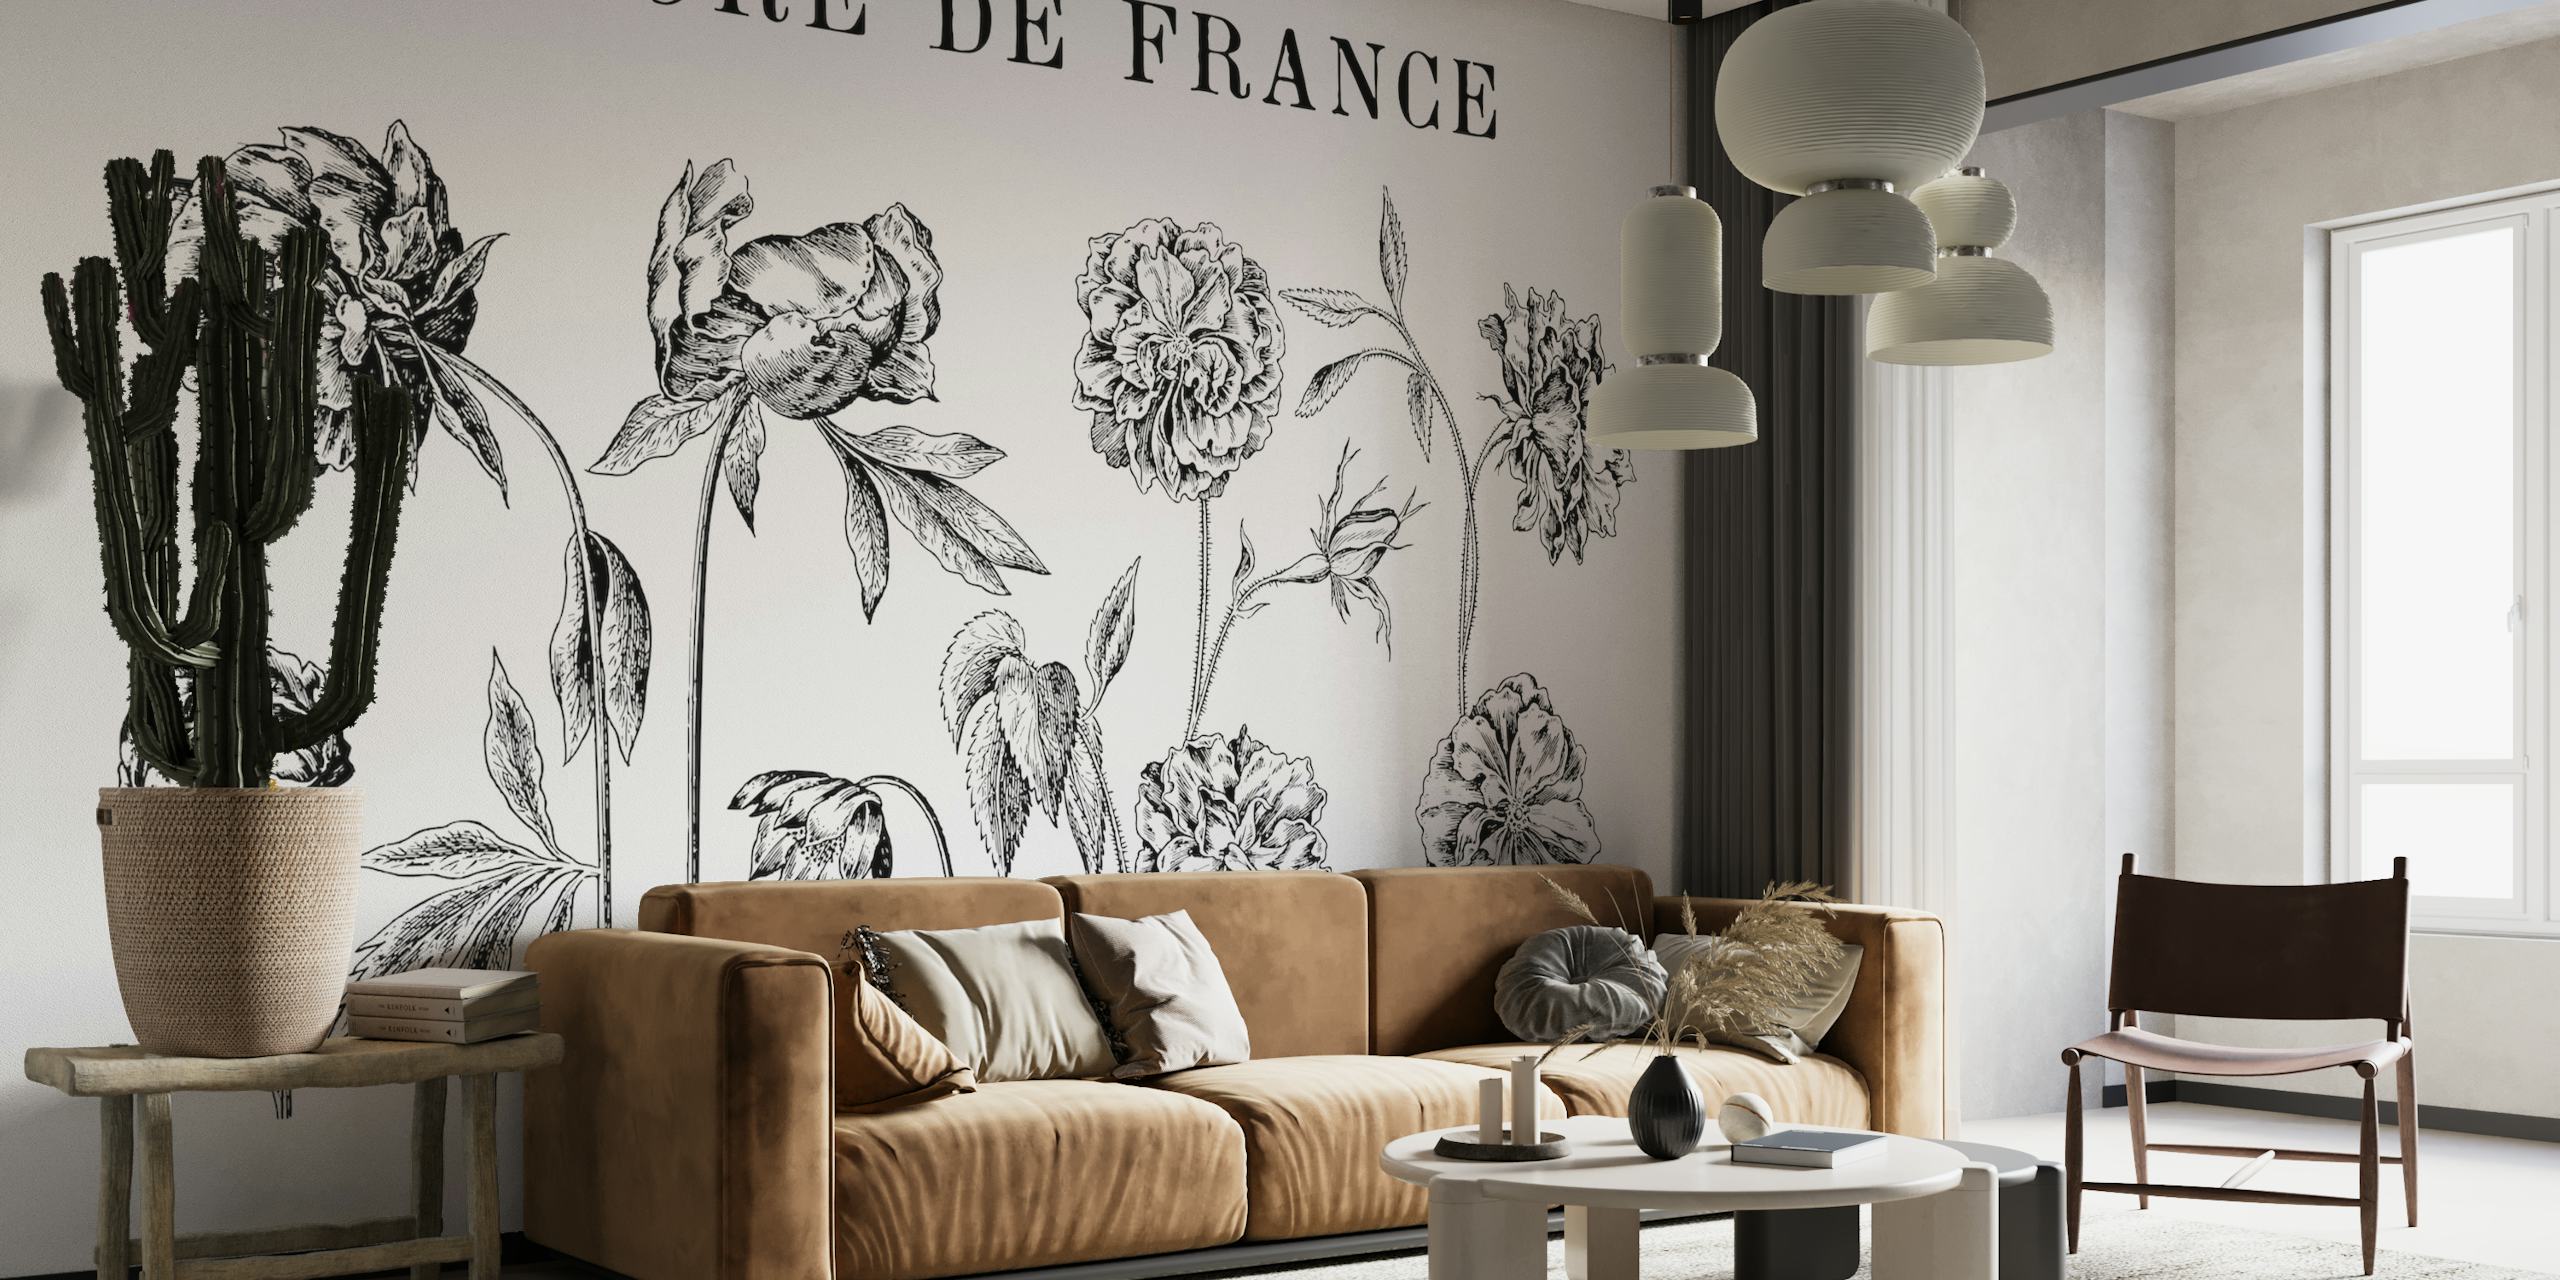 Black and white botanical drawings wall mural showing detailed historic floral artwork titled 'FLORE DE FRANCE'